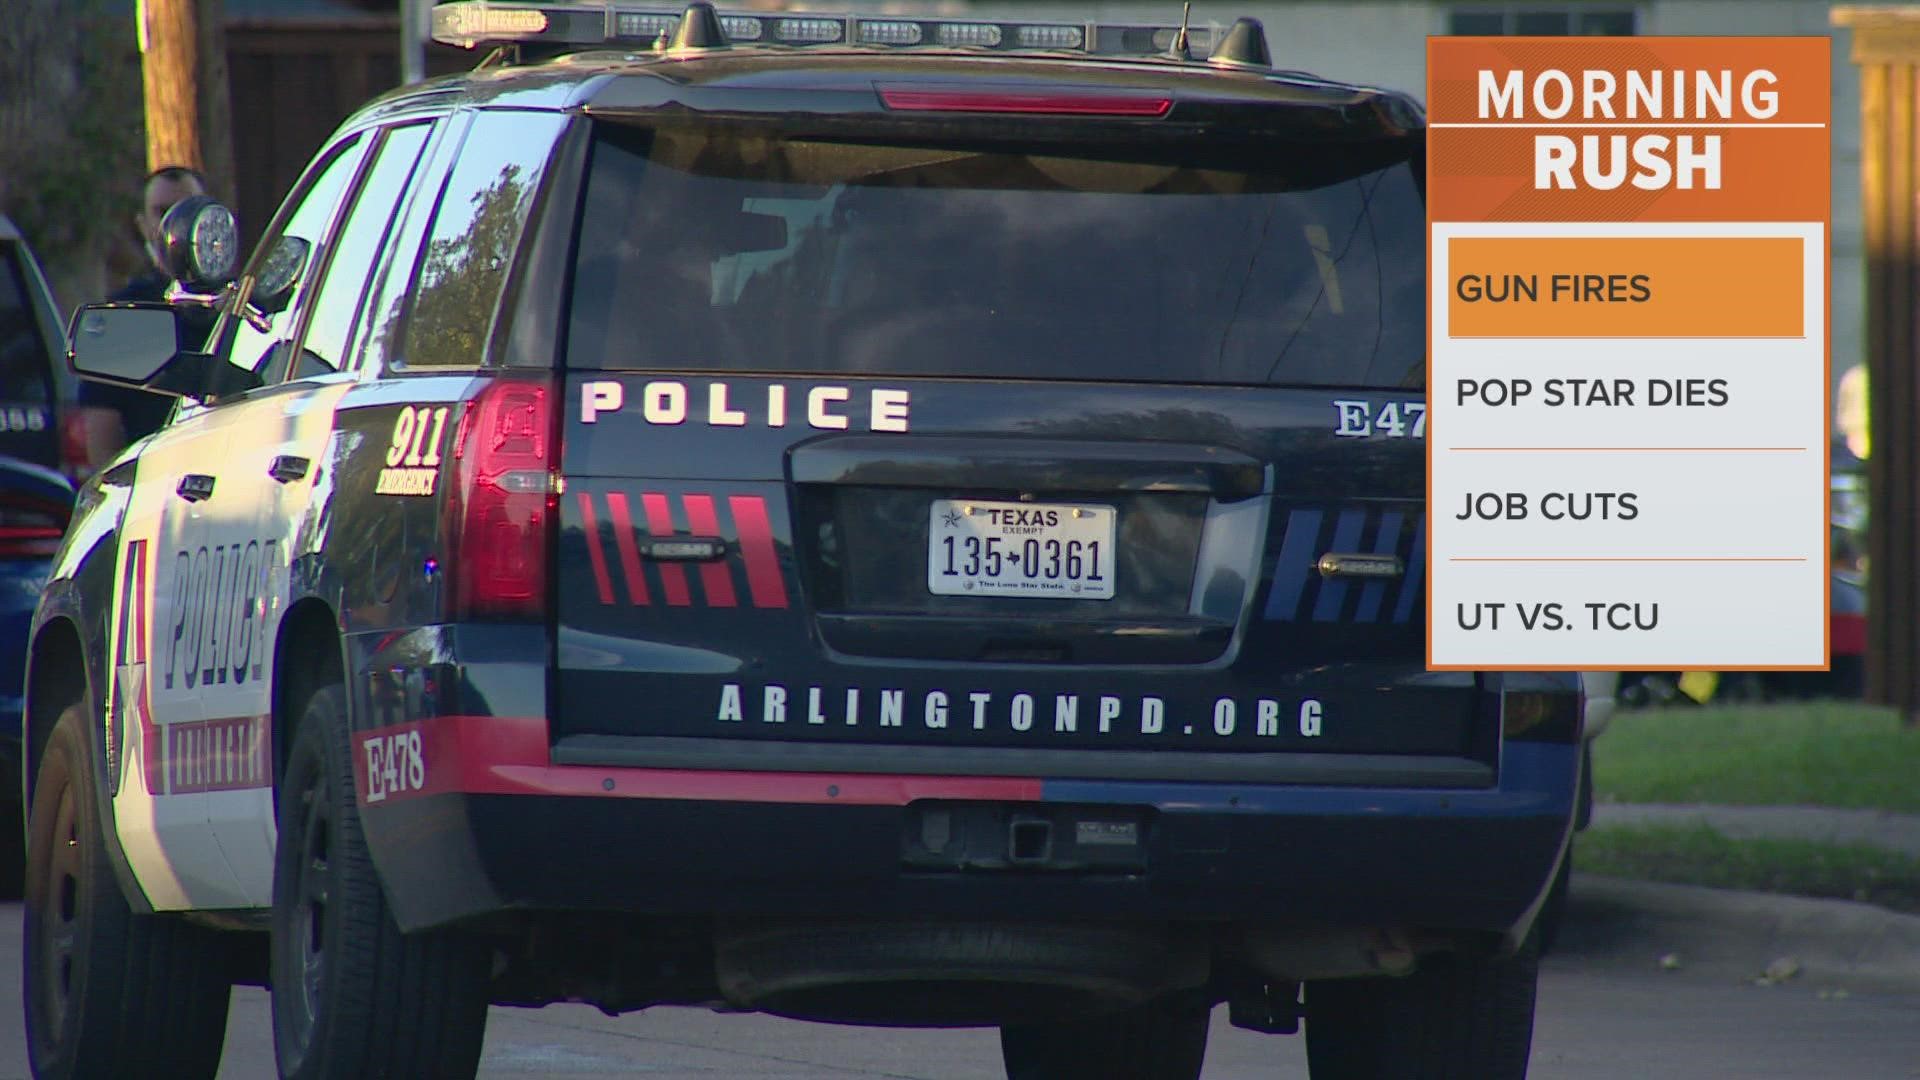 Details are limited at this time, but Arlington police say no one was injured in the shooting.